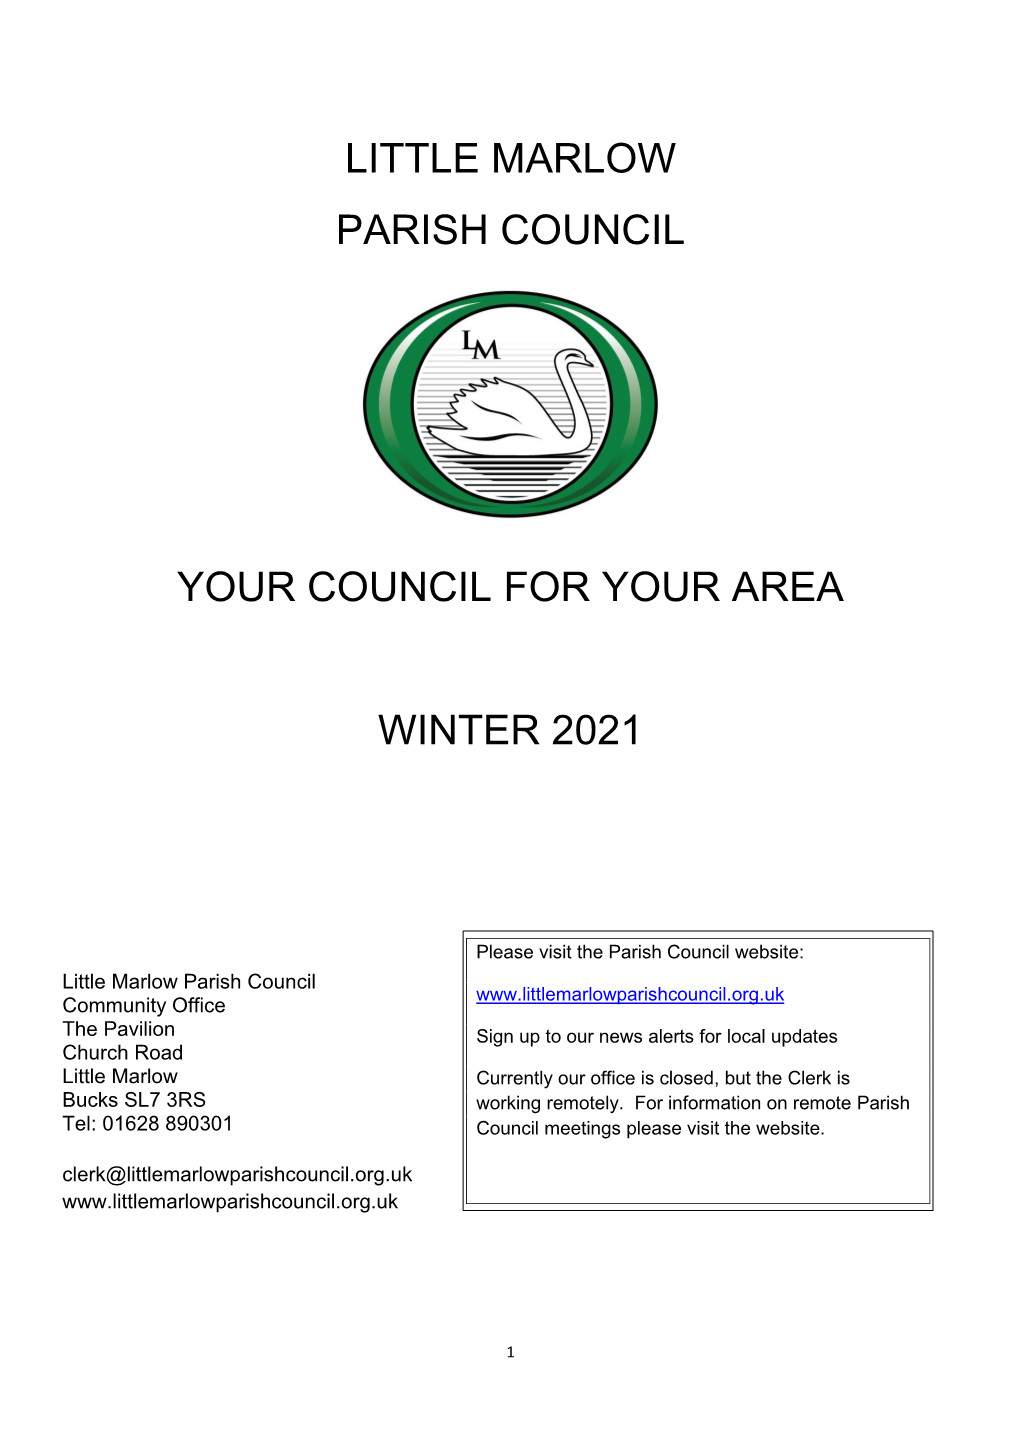 Little Marlow Parish Council Your Council for Your Area Winter 2021